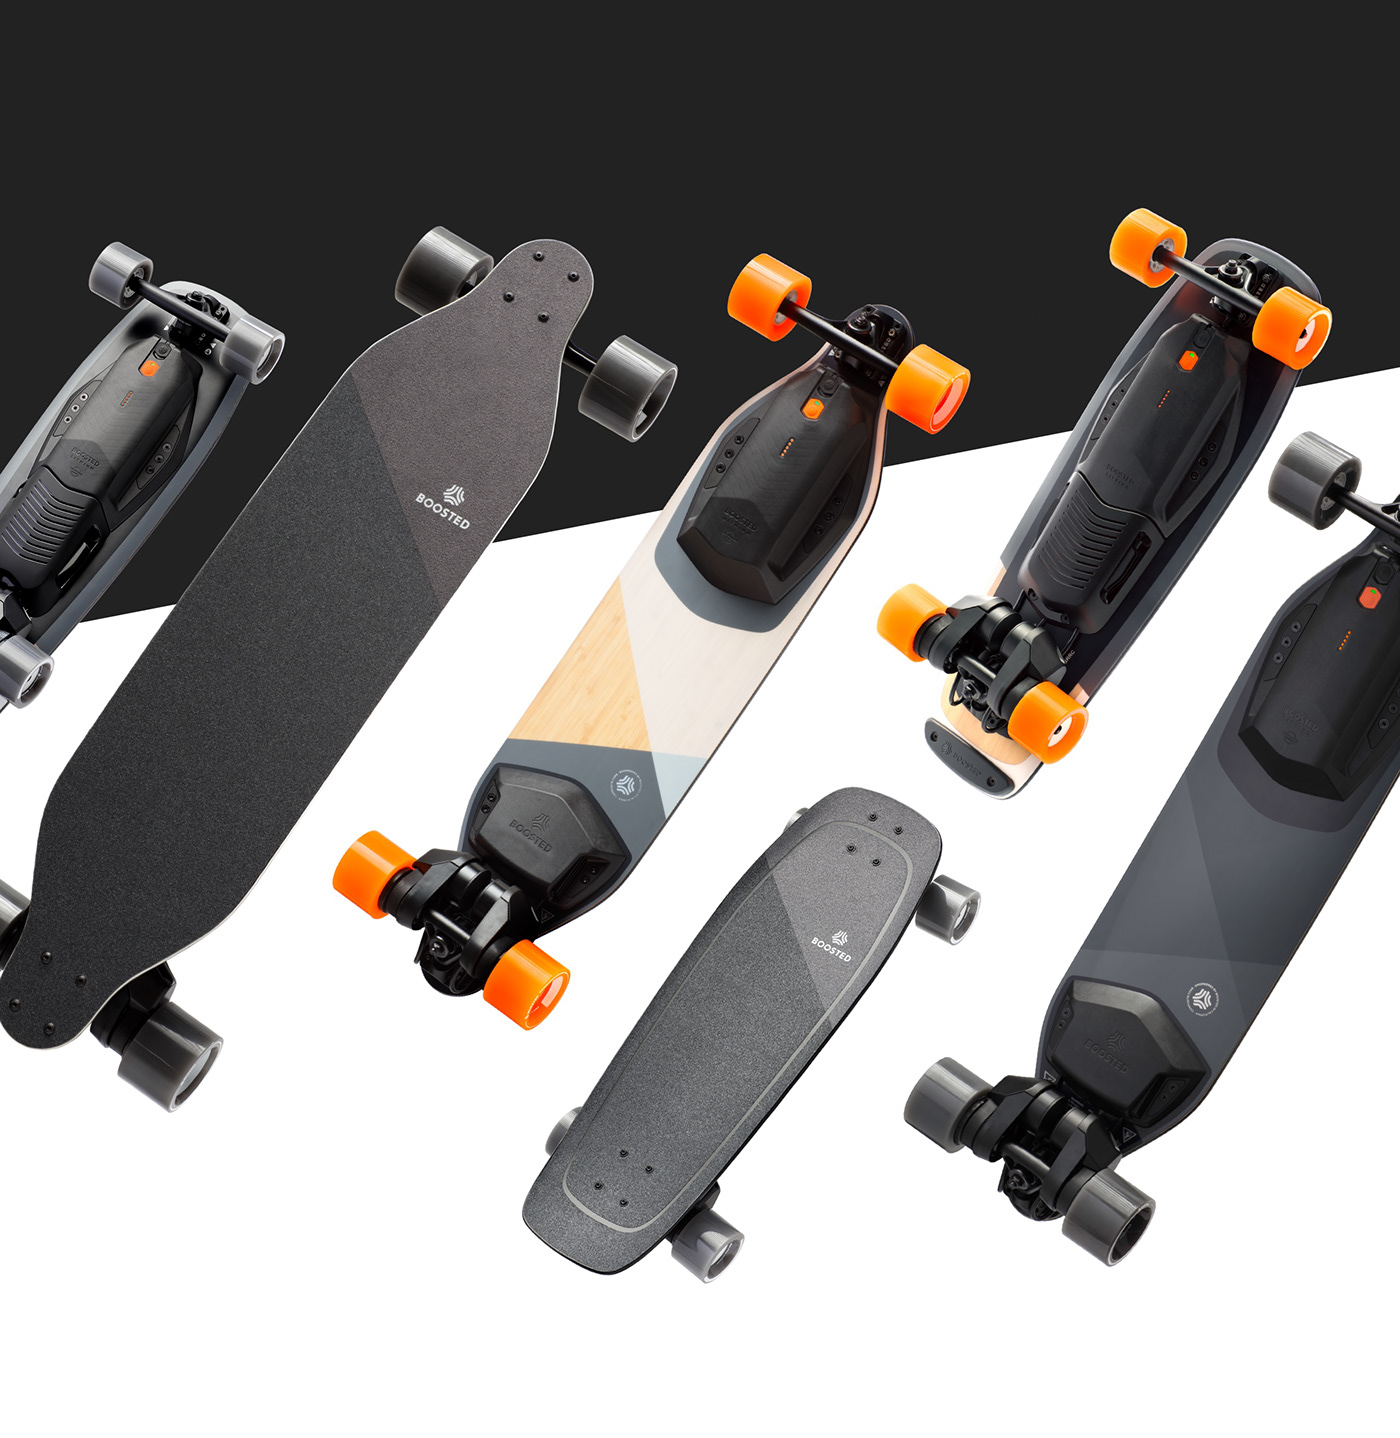 boosted   electric skateboard skate commute Vehicle ride